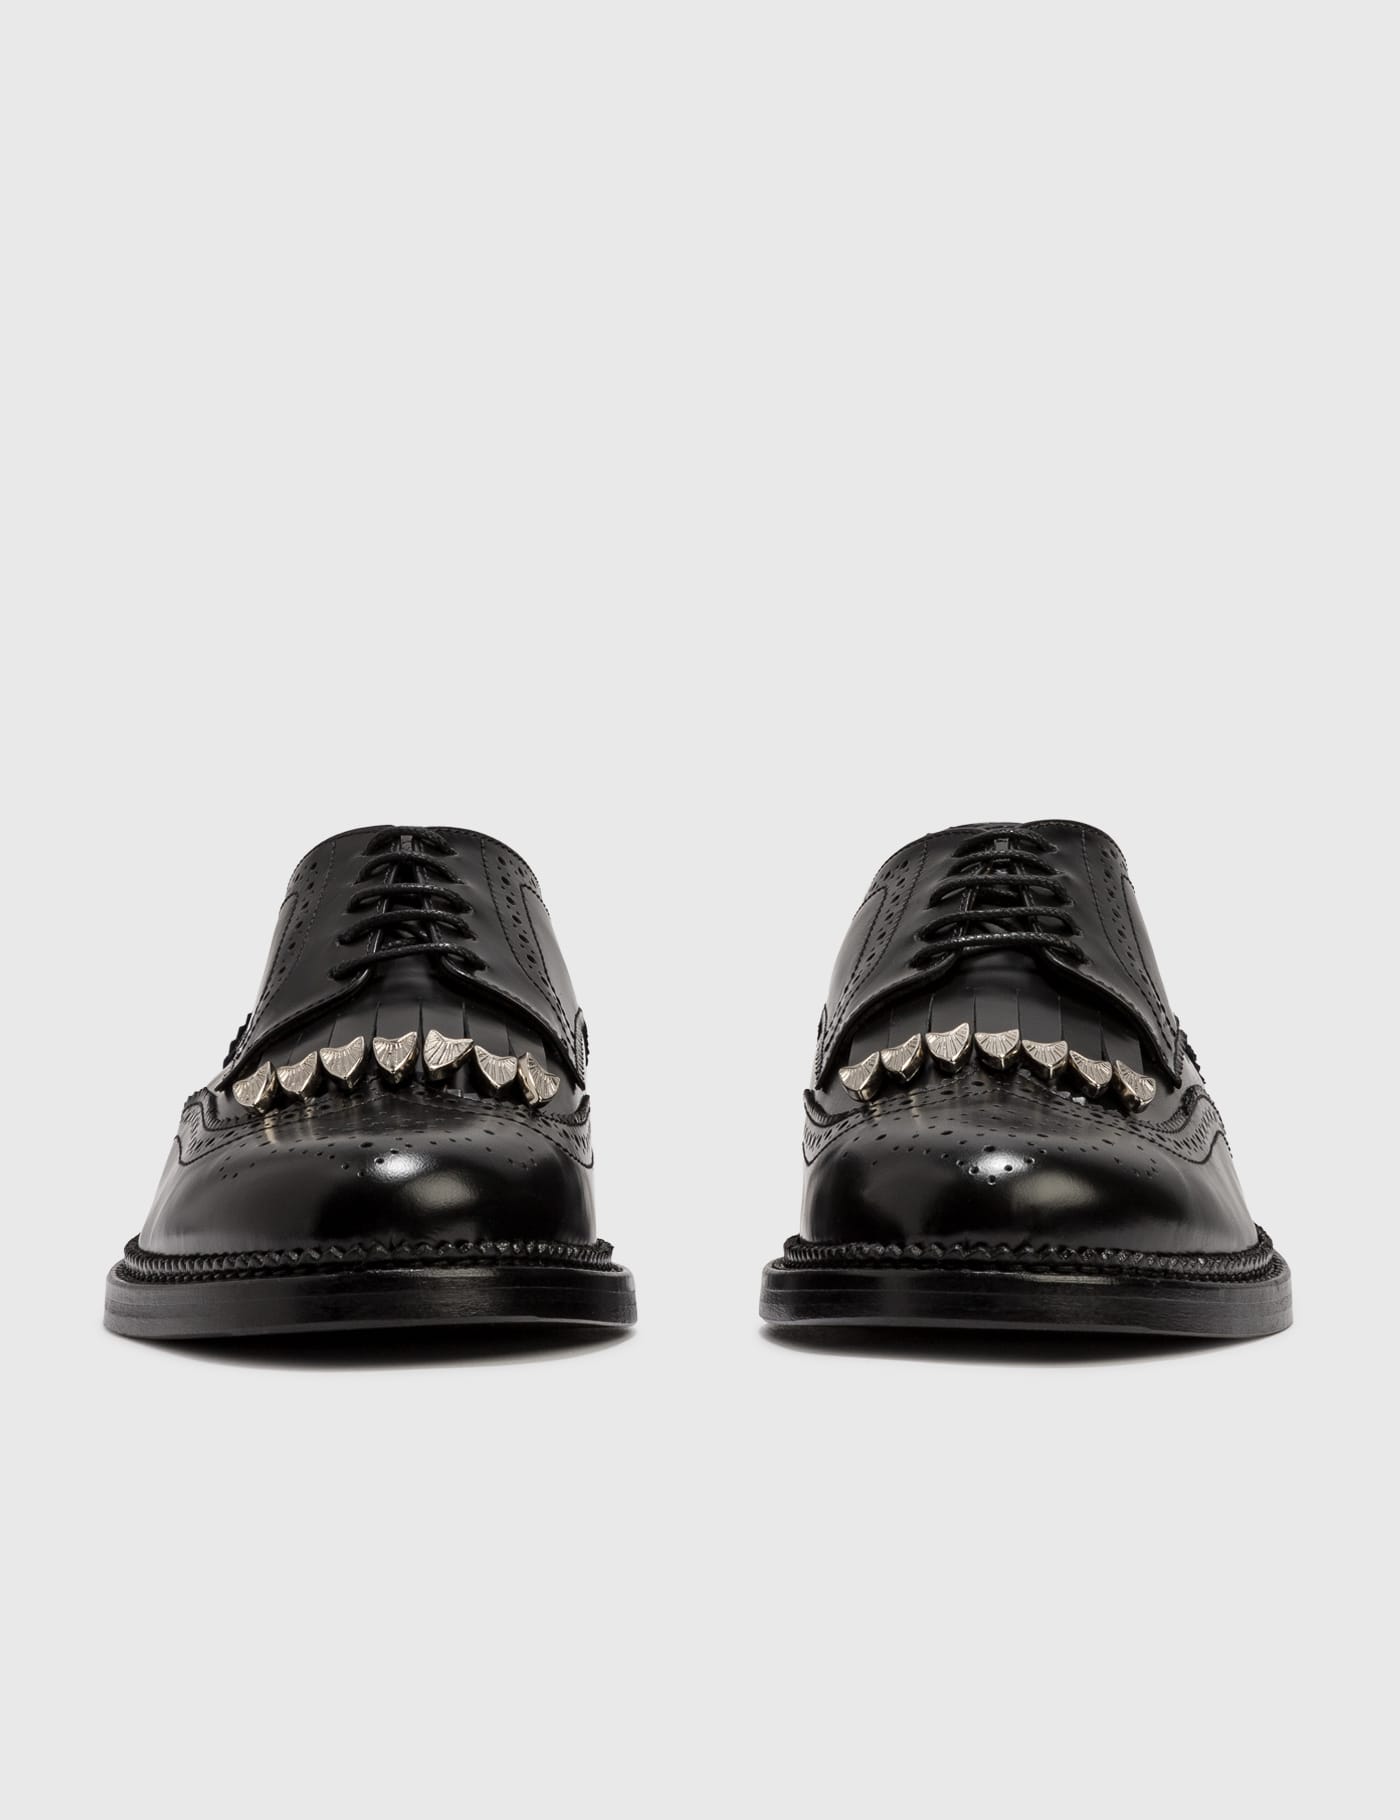 Toga Virilis - Tassel Brogues | HBX - Globally Curated Fashion and  Lifestyle by Hypebeast